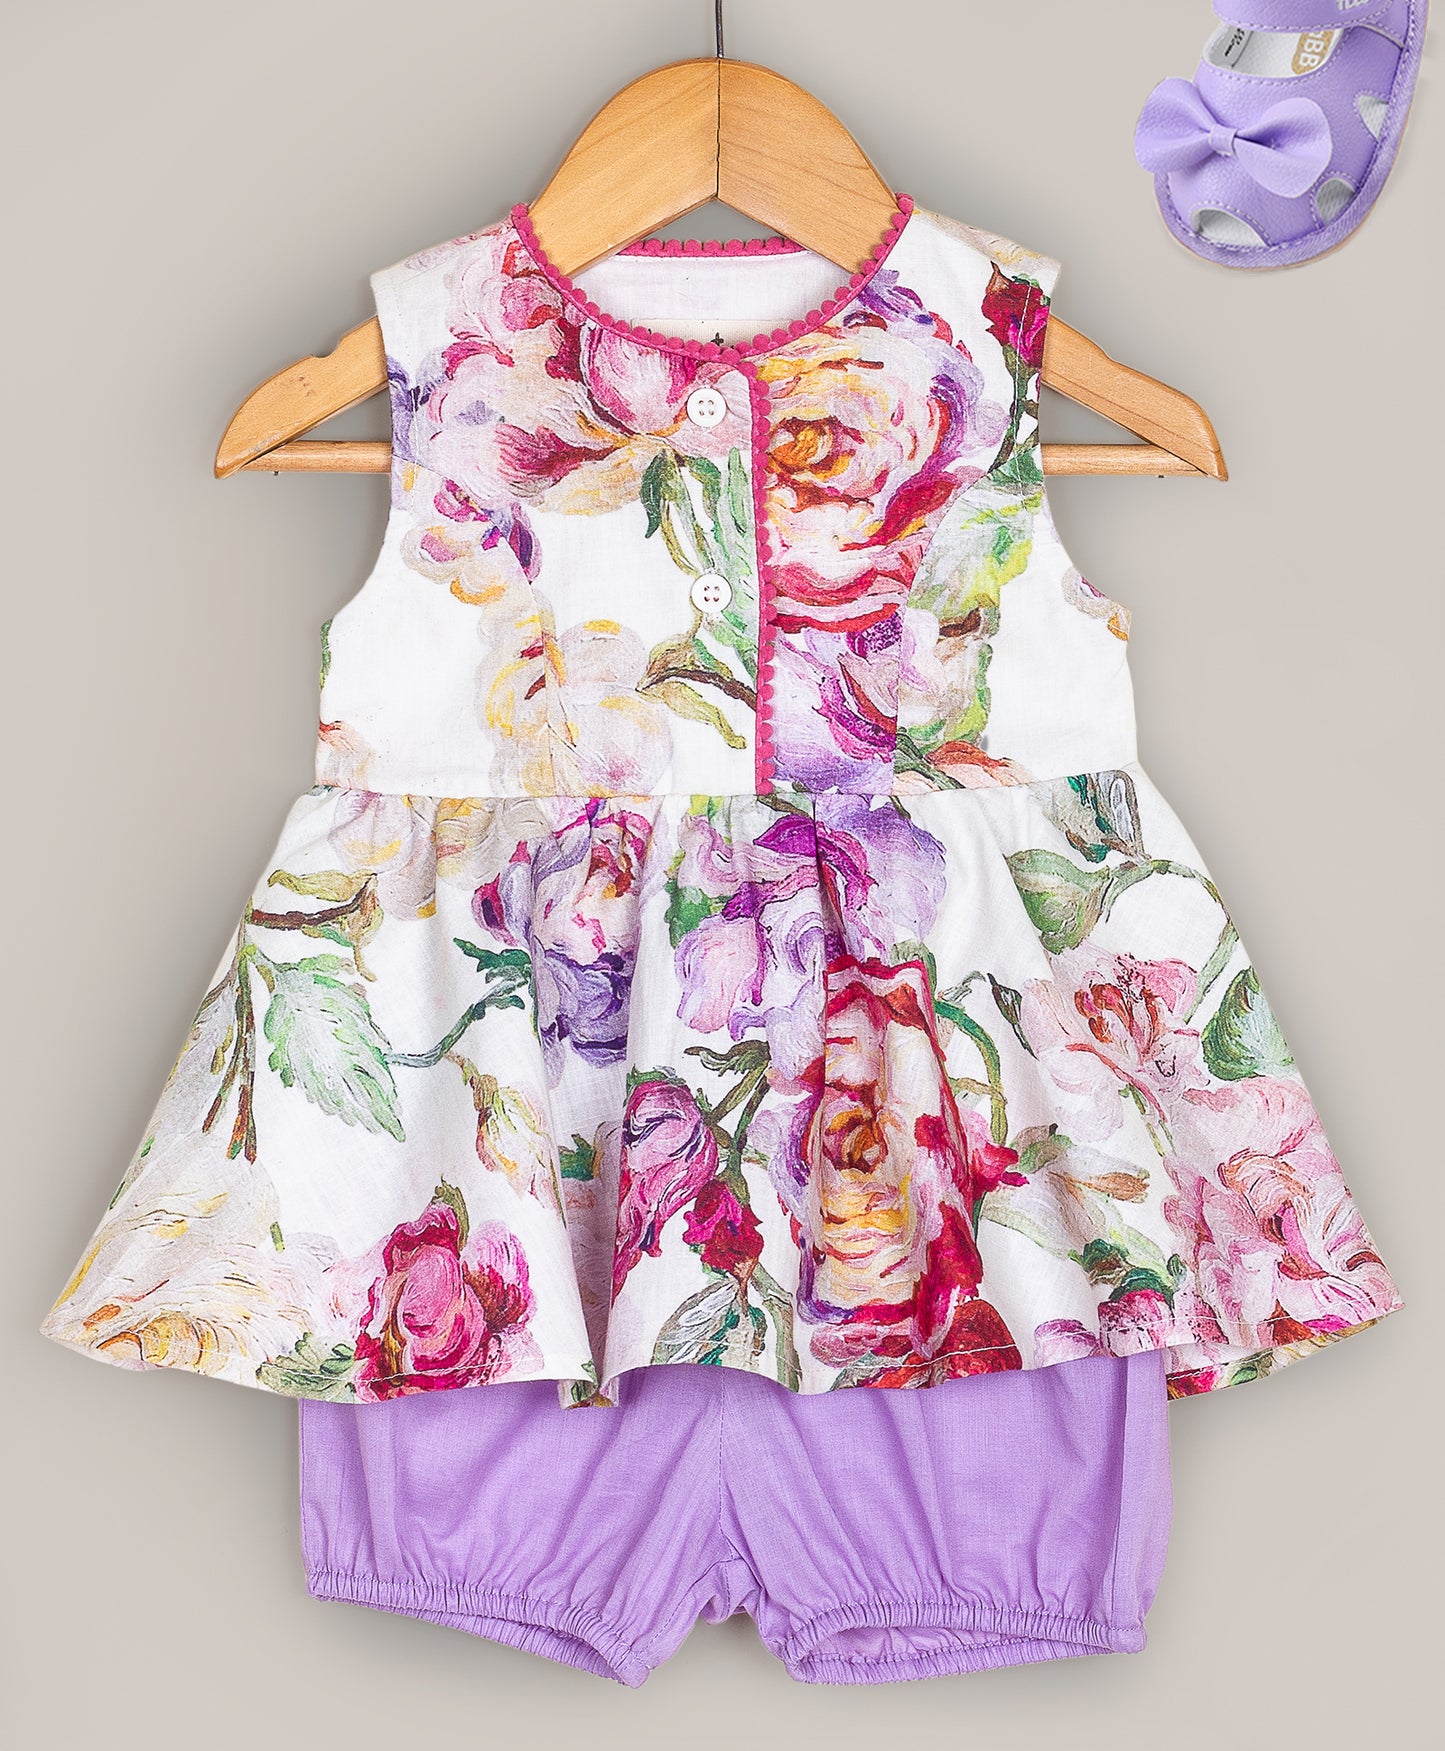 Floral print top and shorts infant set